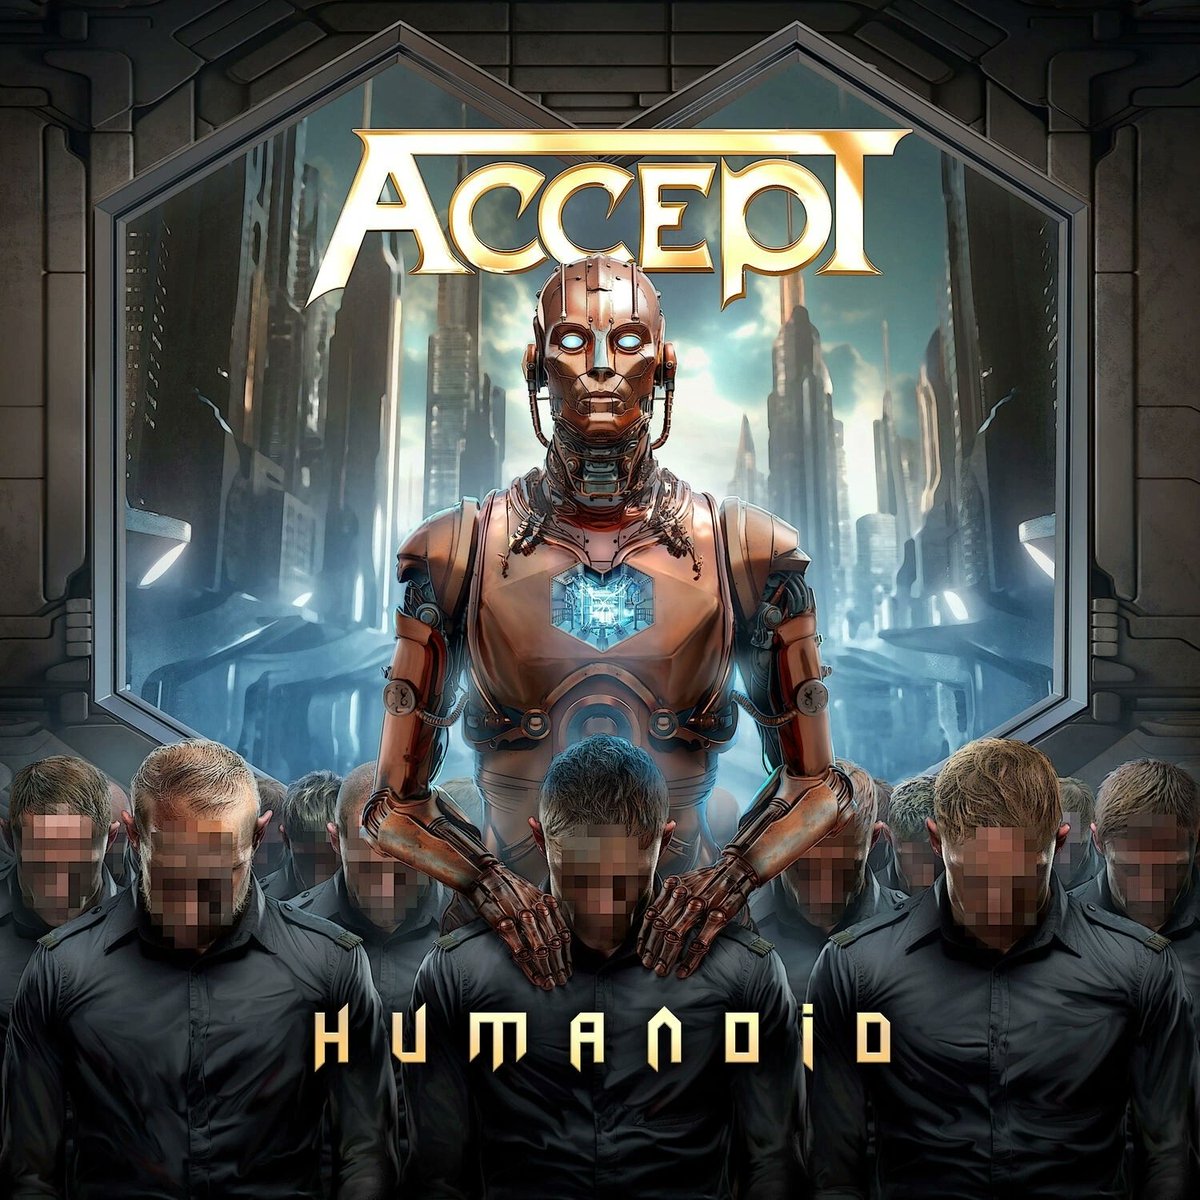 Accept - Humanoid (2024)
Heavy Metal 
Germany
#rocknewsreleases #rocknewsrelease #rocknews #rock #rnr #rn #heavymetal #accept 

@accepttheband